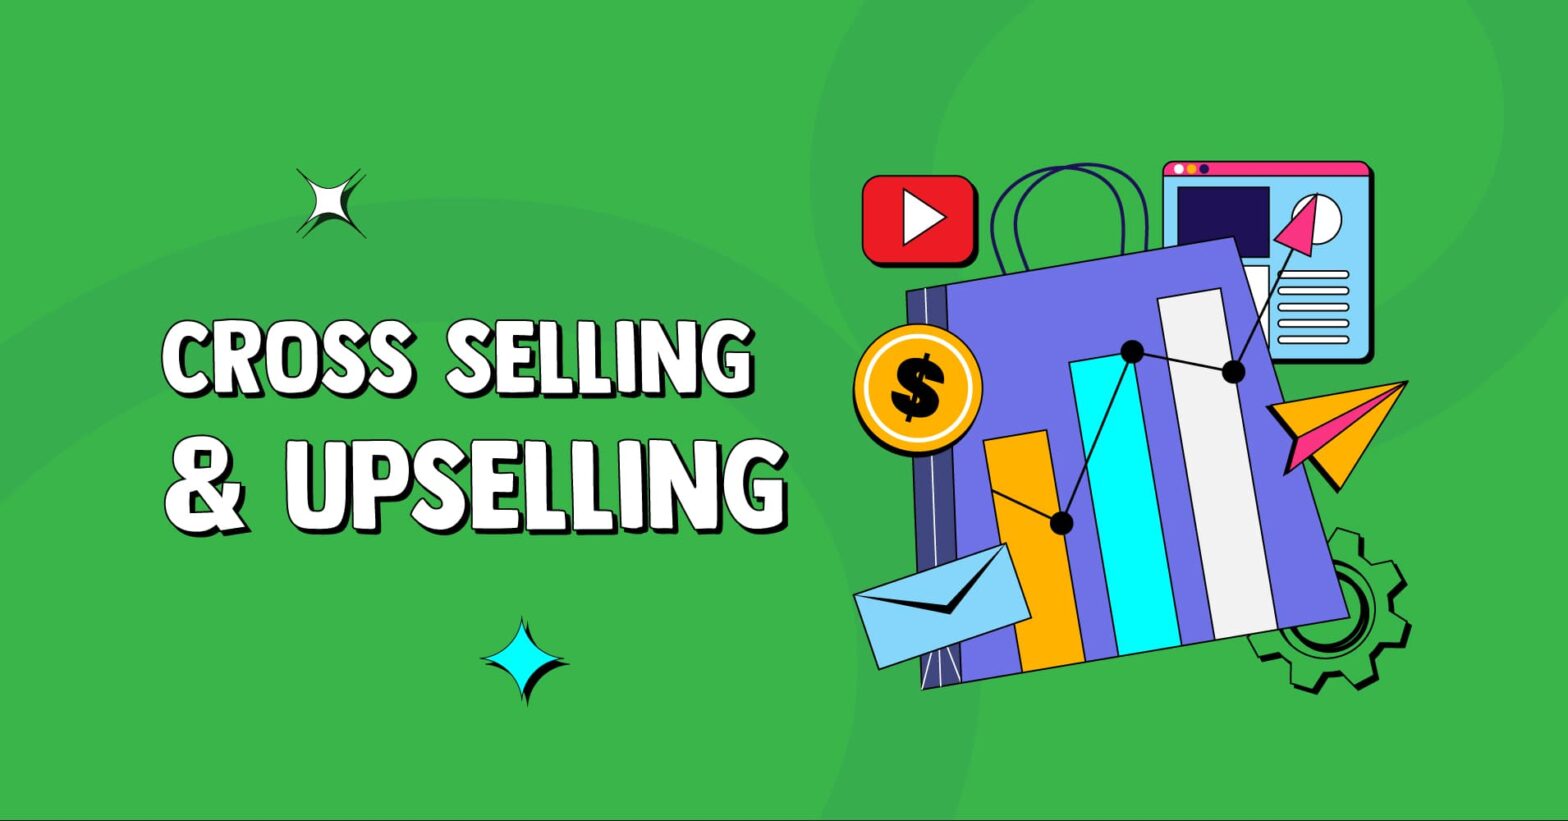 Cross selling - Upselling trong nền tảng e-commerce